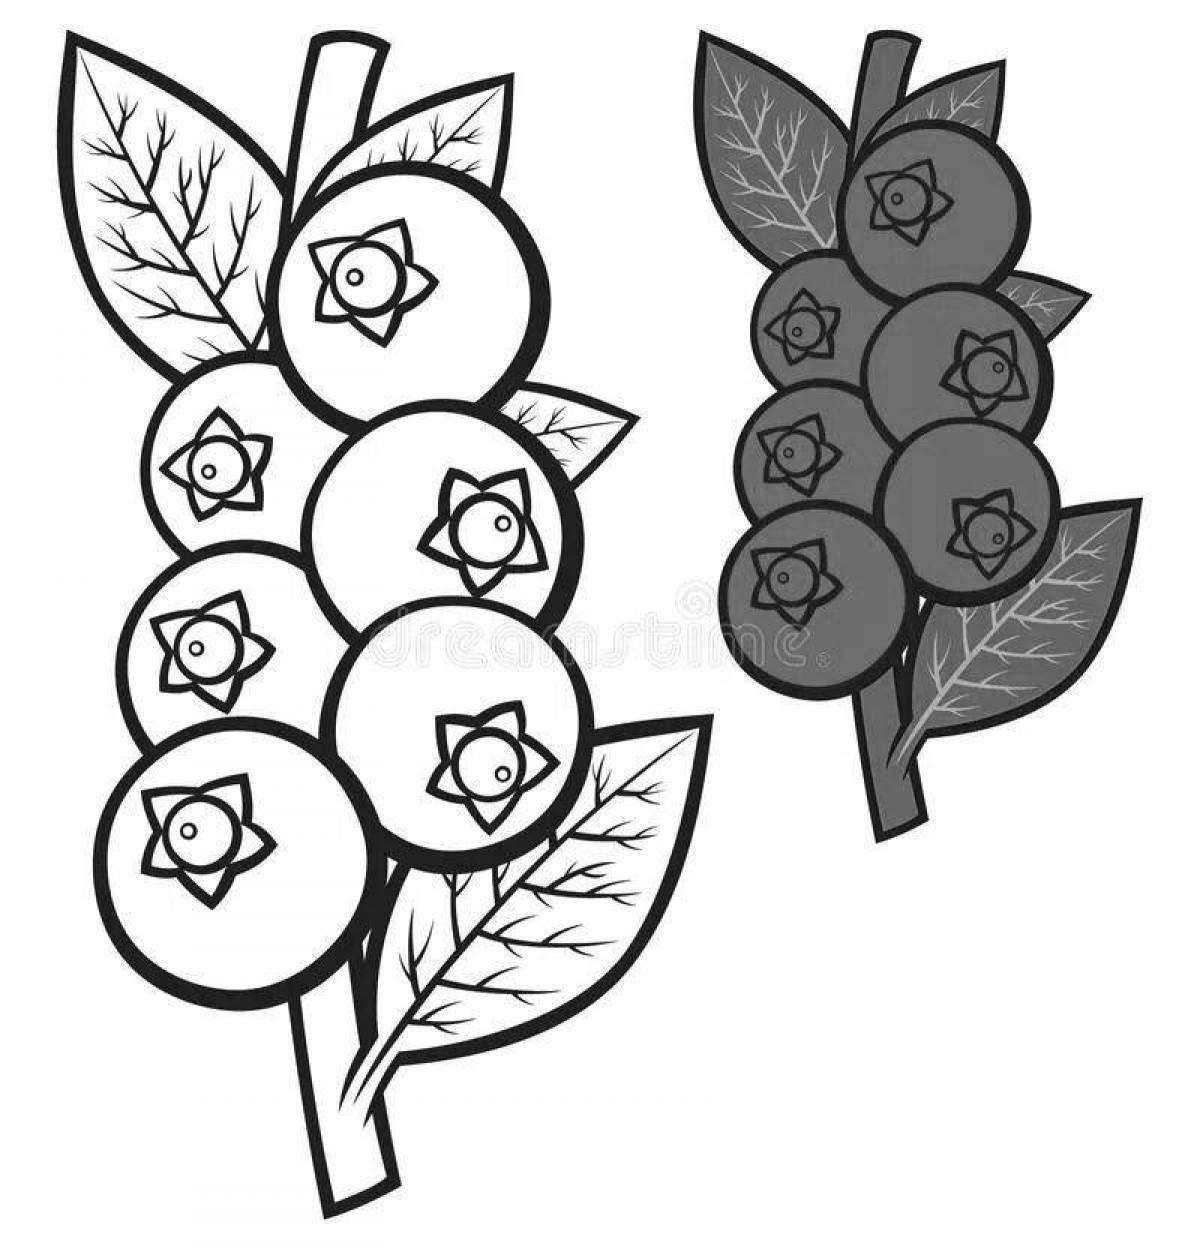 Awesome blueberry coloring page